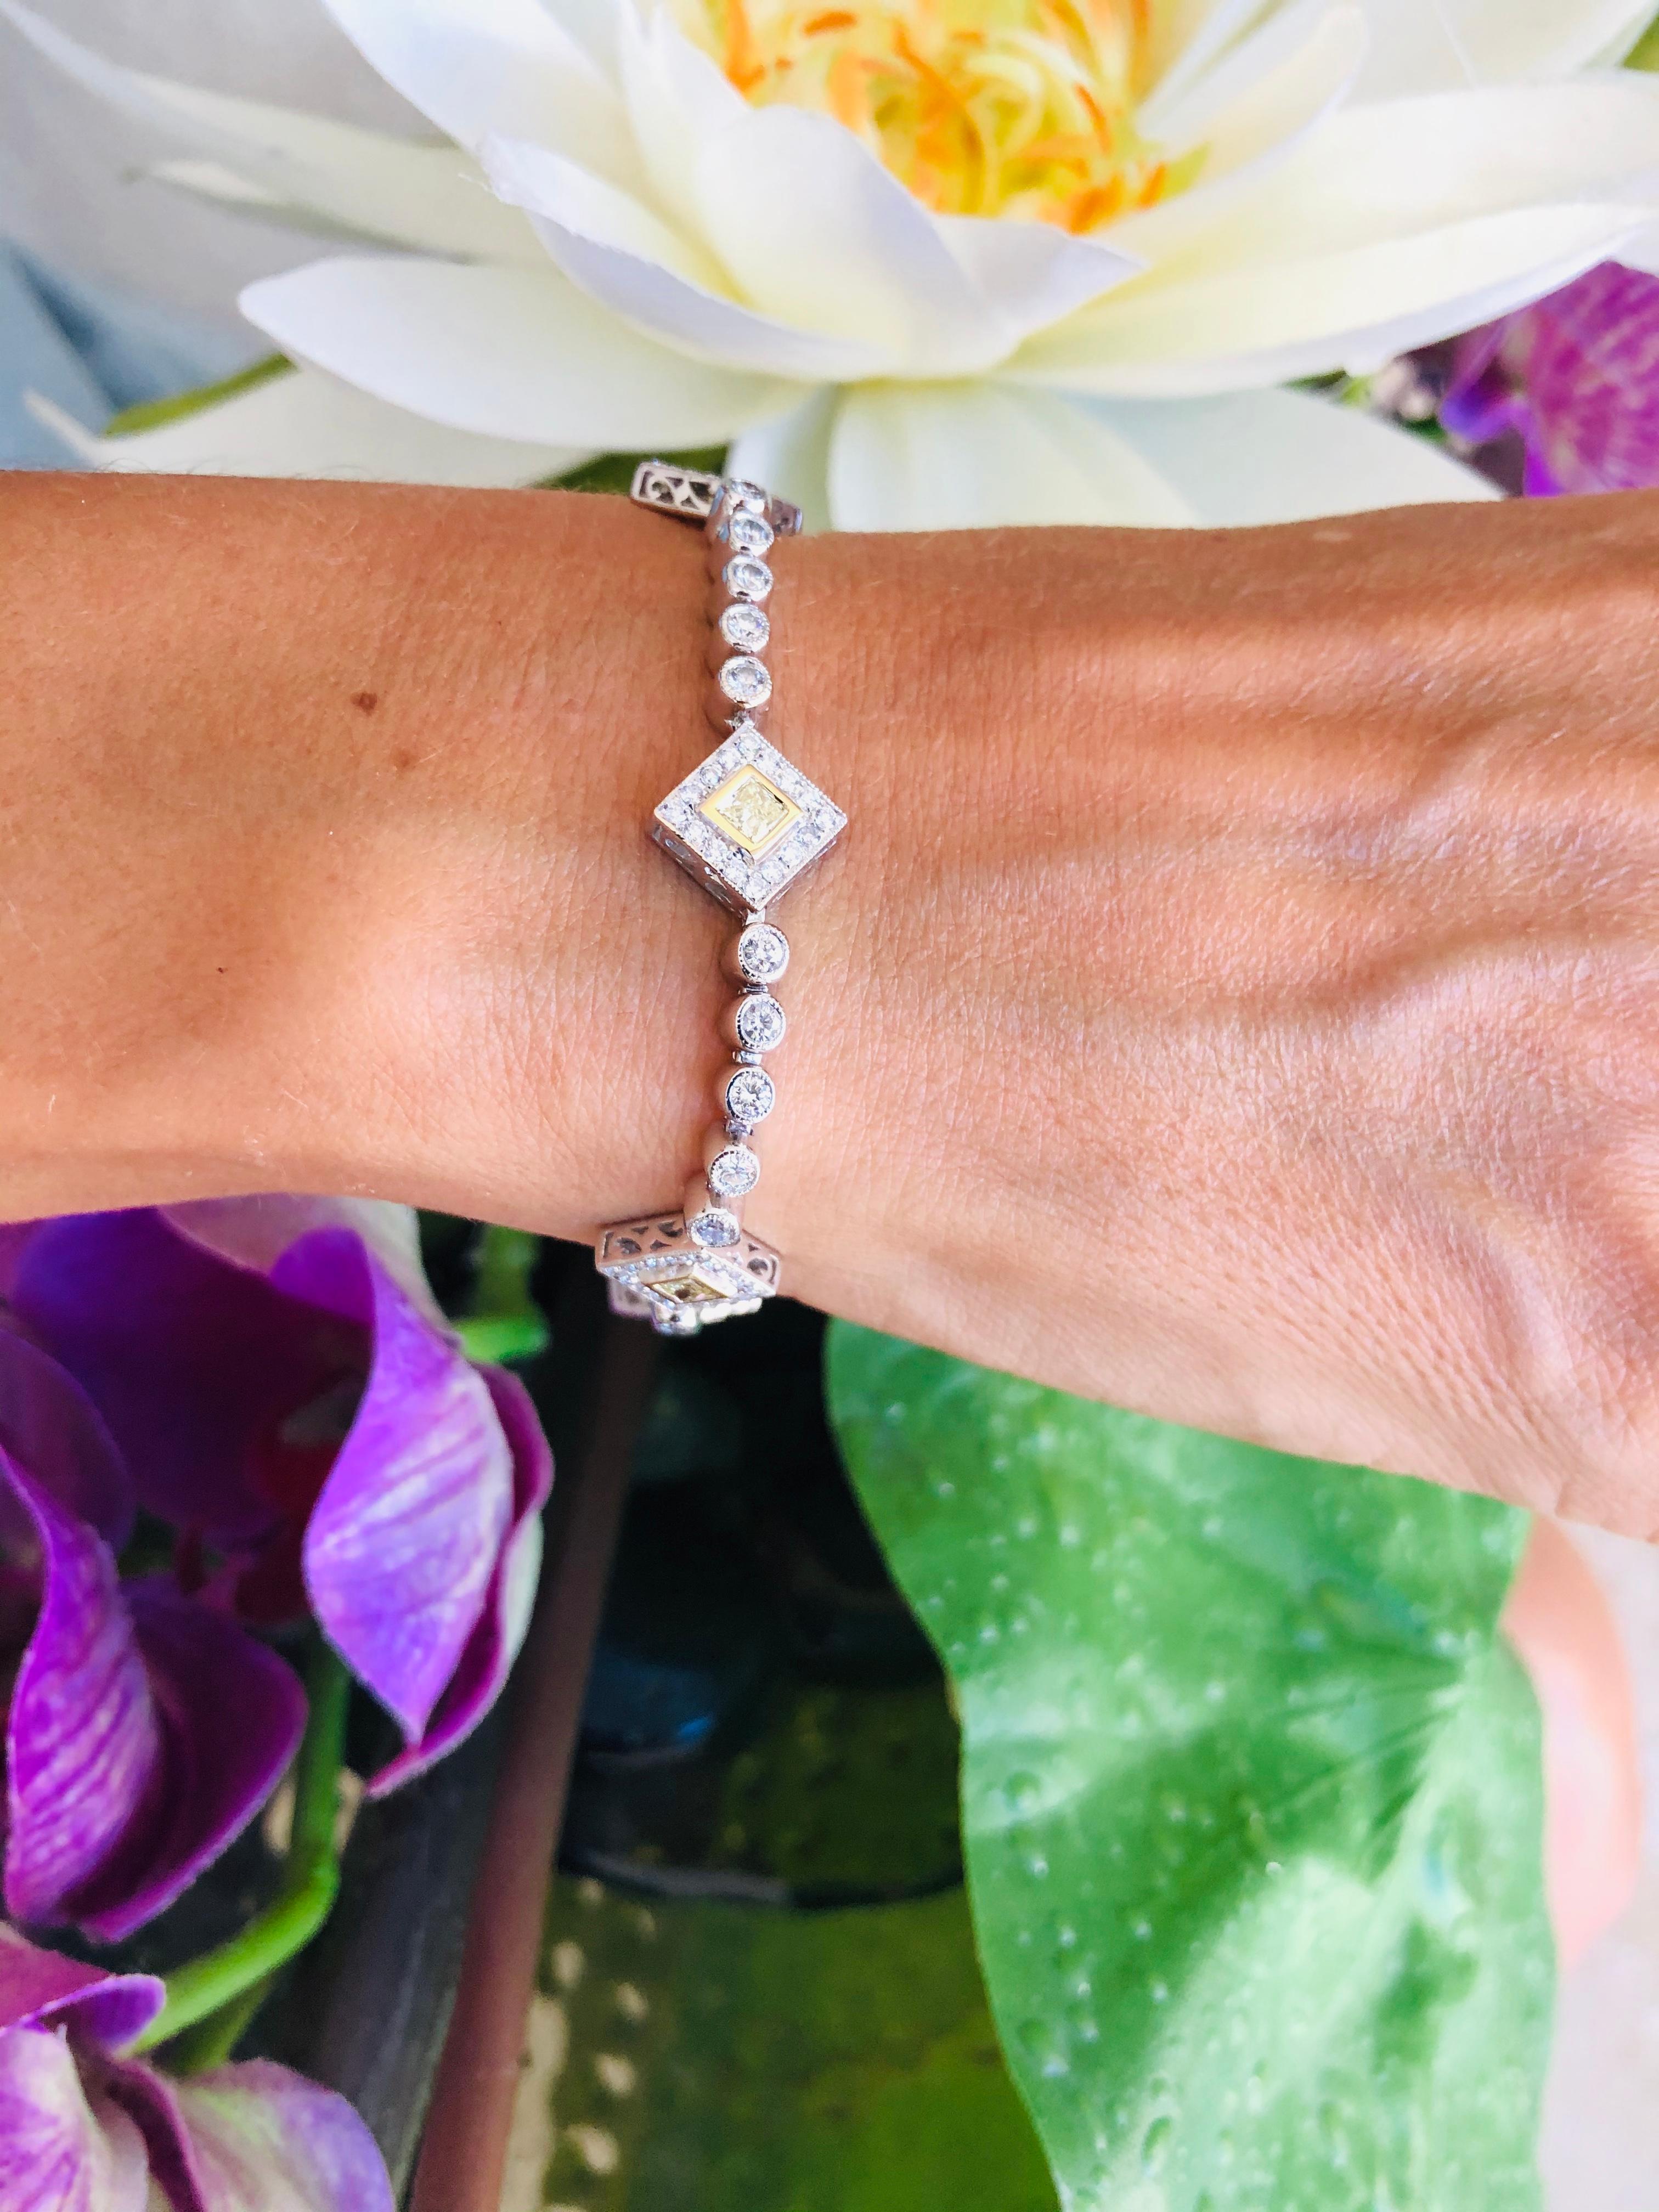 Offered here is a gorgeous two tone diamond bracelet set in 18kt gold. The bracelet has 126 round brilliant cut diamonds G-H color Vs2 in clarity with an estimated total weight of 3 carats and 6 natural yellow diamonds Vs2 clarity with approximately